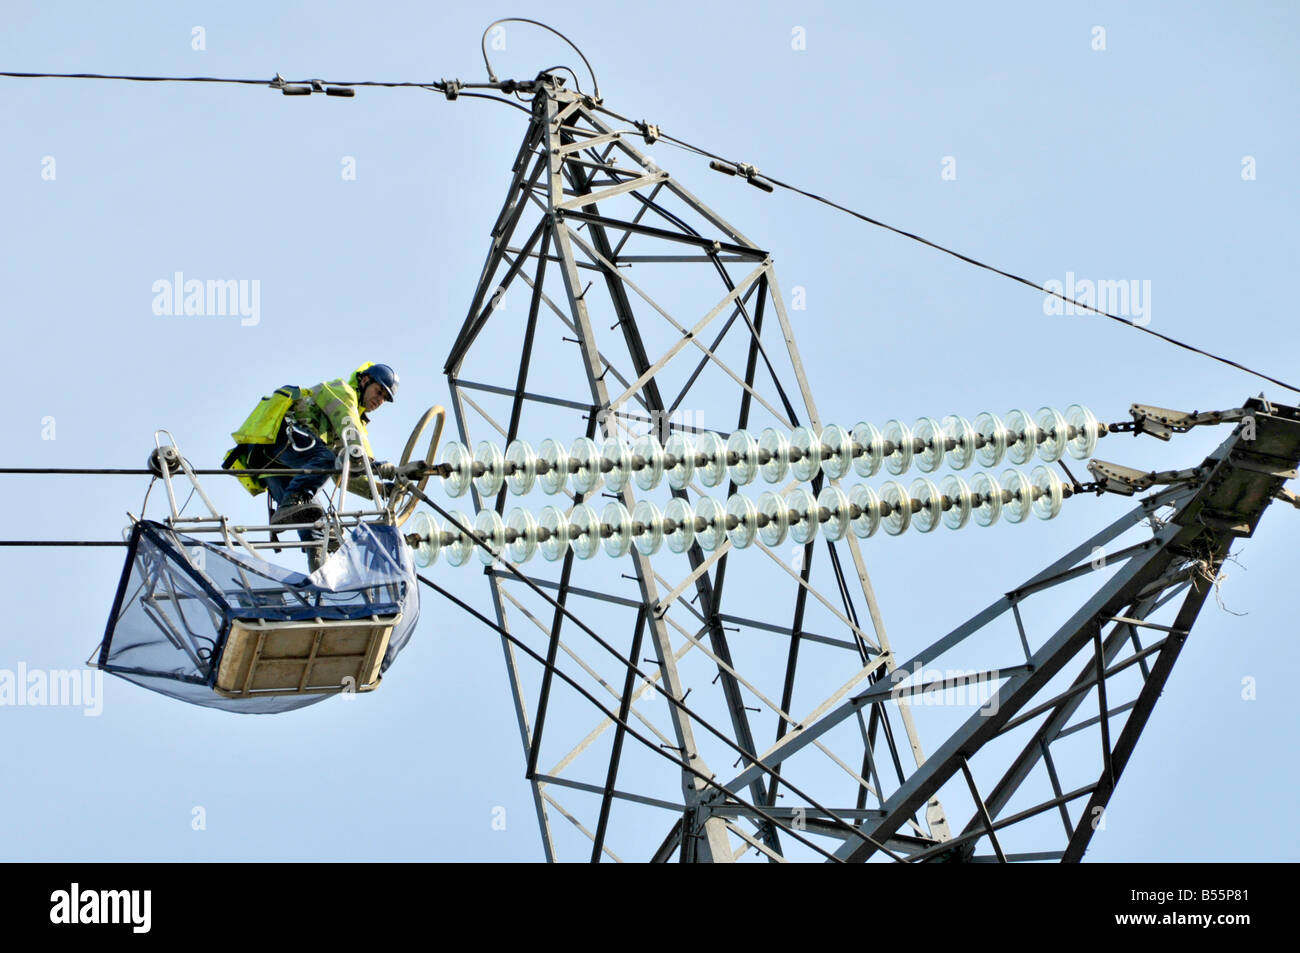 One of a team of electrical engineers working from trolley cradle on high voltage power lines & pylons above Stratford East London England UK Stock Photo